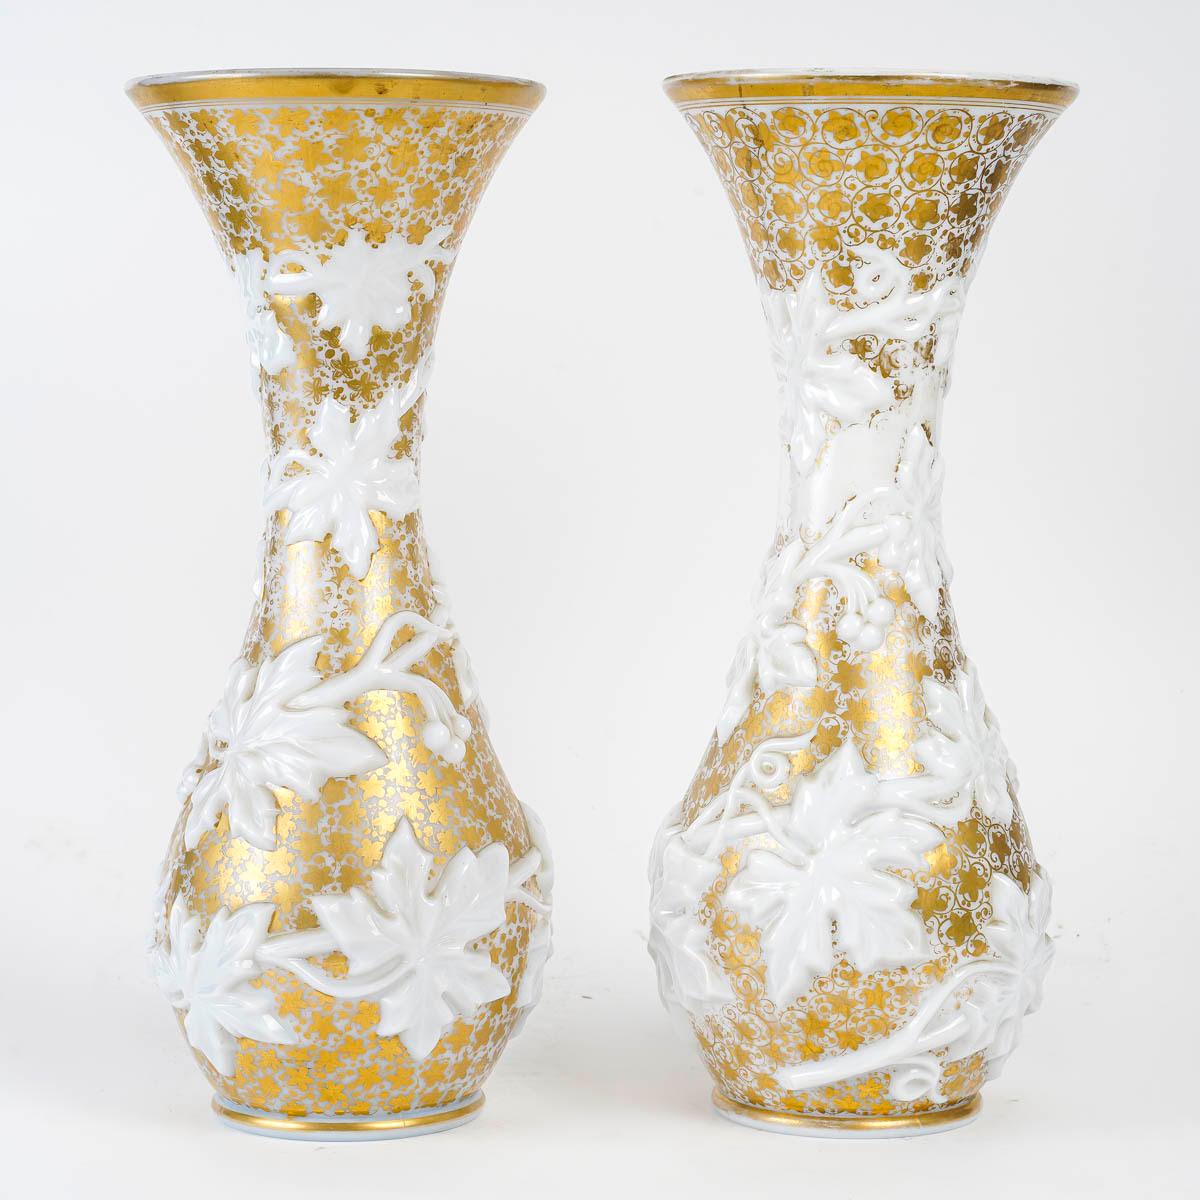 Pair of White Opaline Vases Enhanced with Gold, 19th Century, Napoleon III period.

A pair of white opaline vases with foliage in relief enhanced with gold, 19th century, Napoleon III period.
h: 42,5cm, d: 17cm